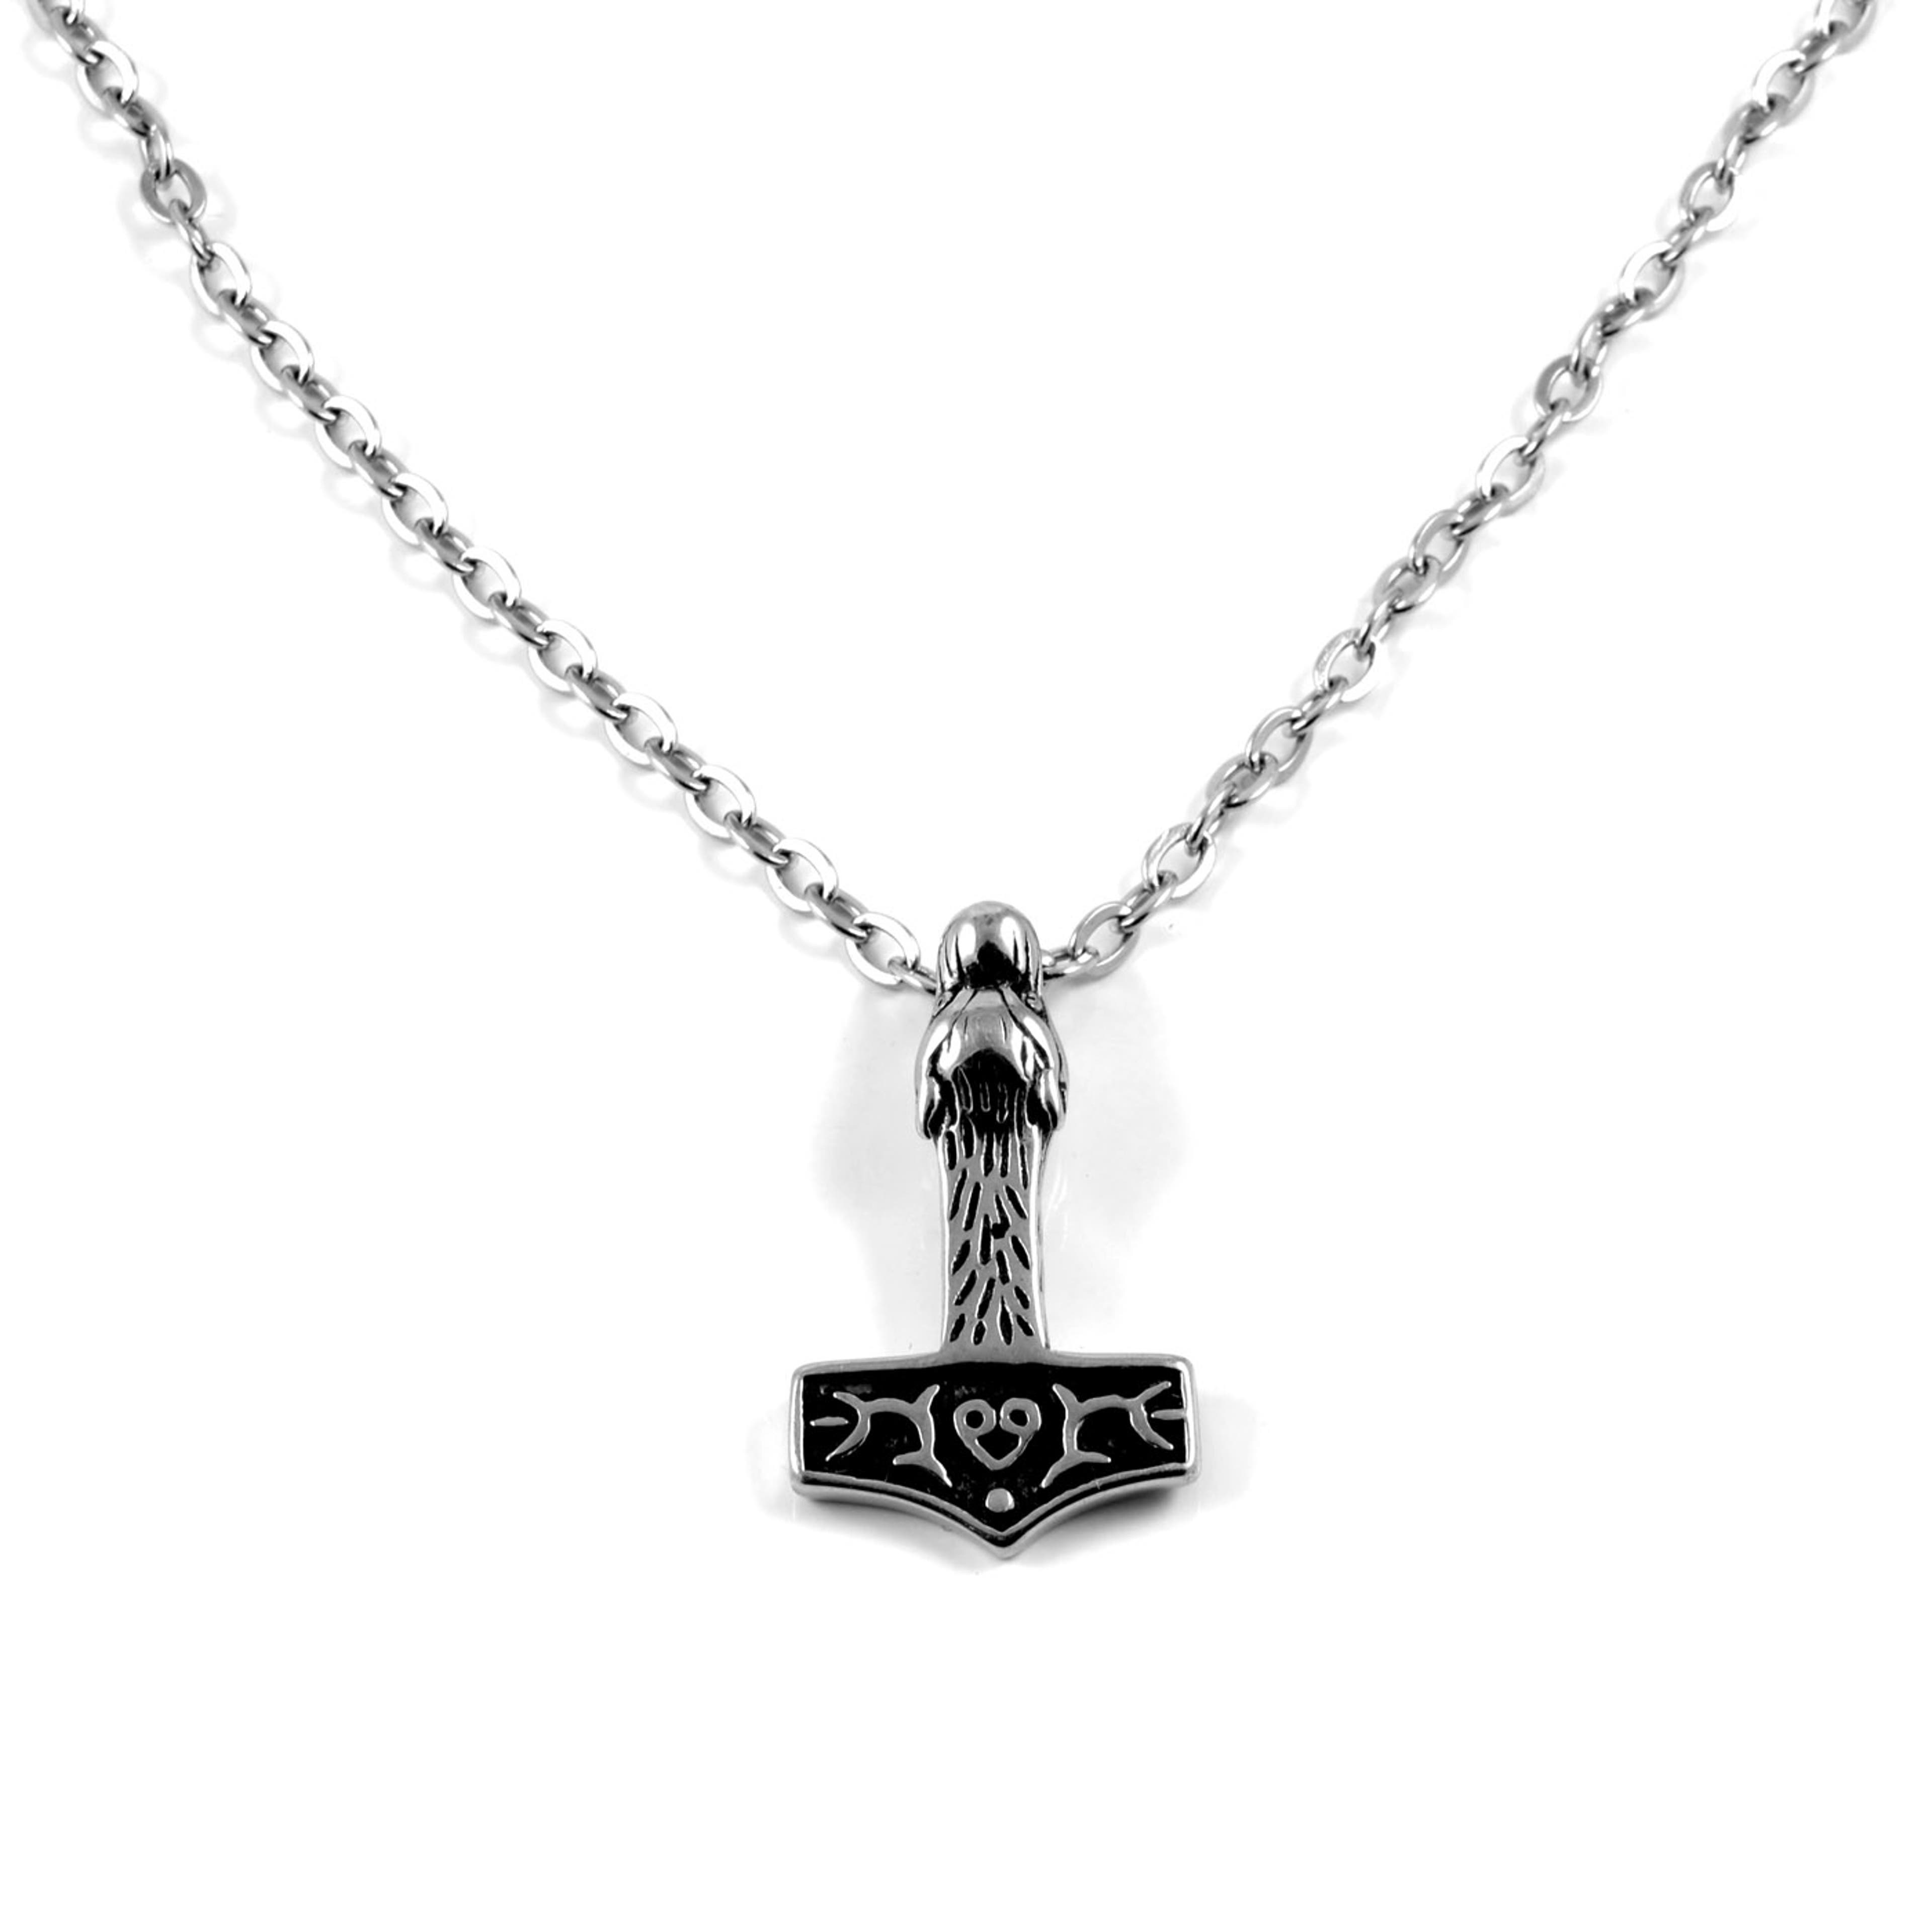 Dragon Thor’s Hammer Steel Necklace